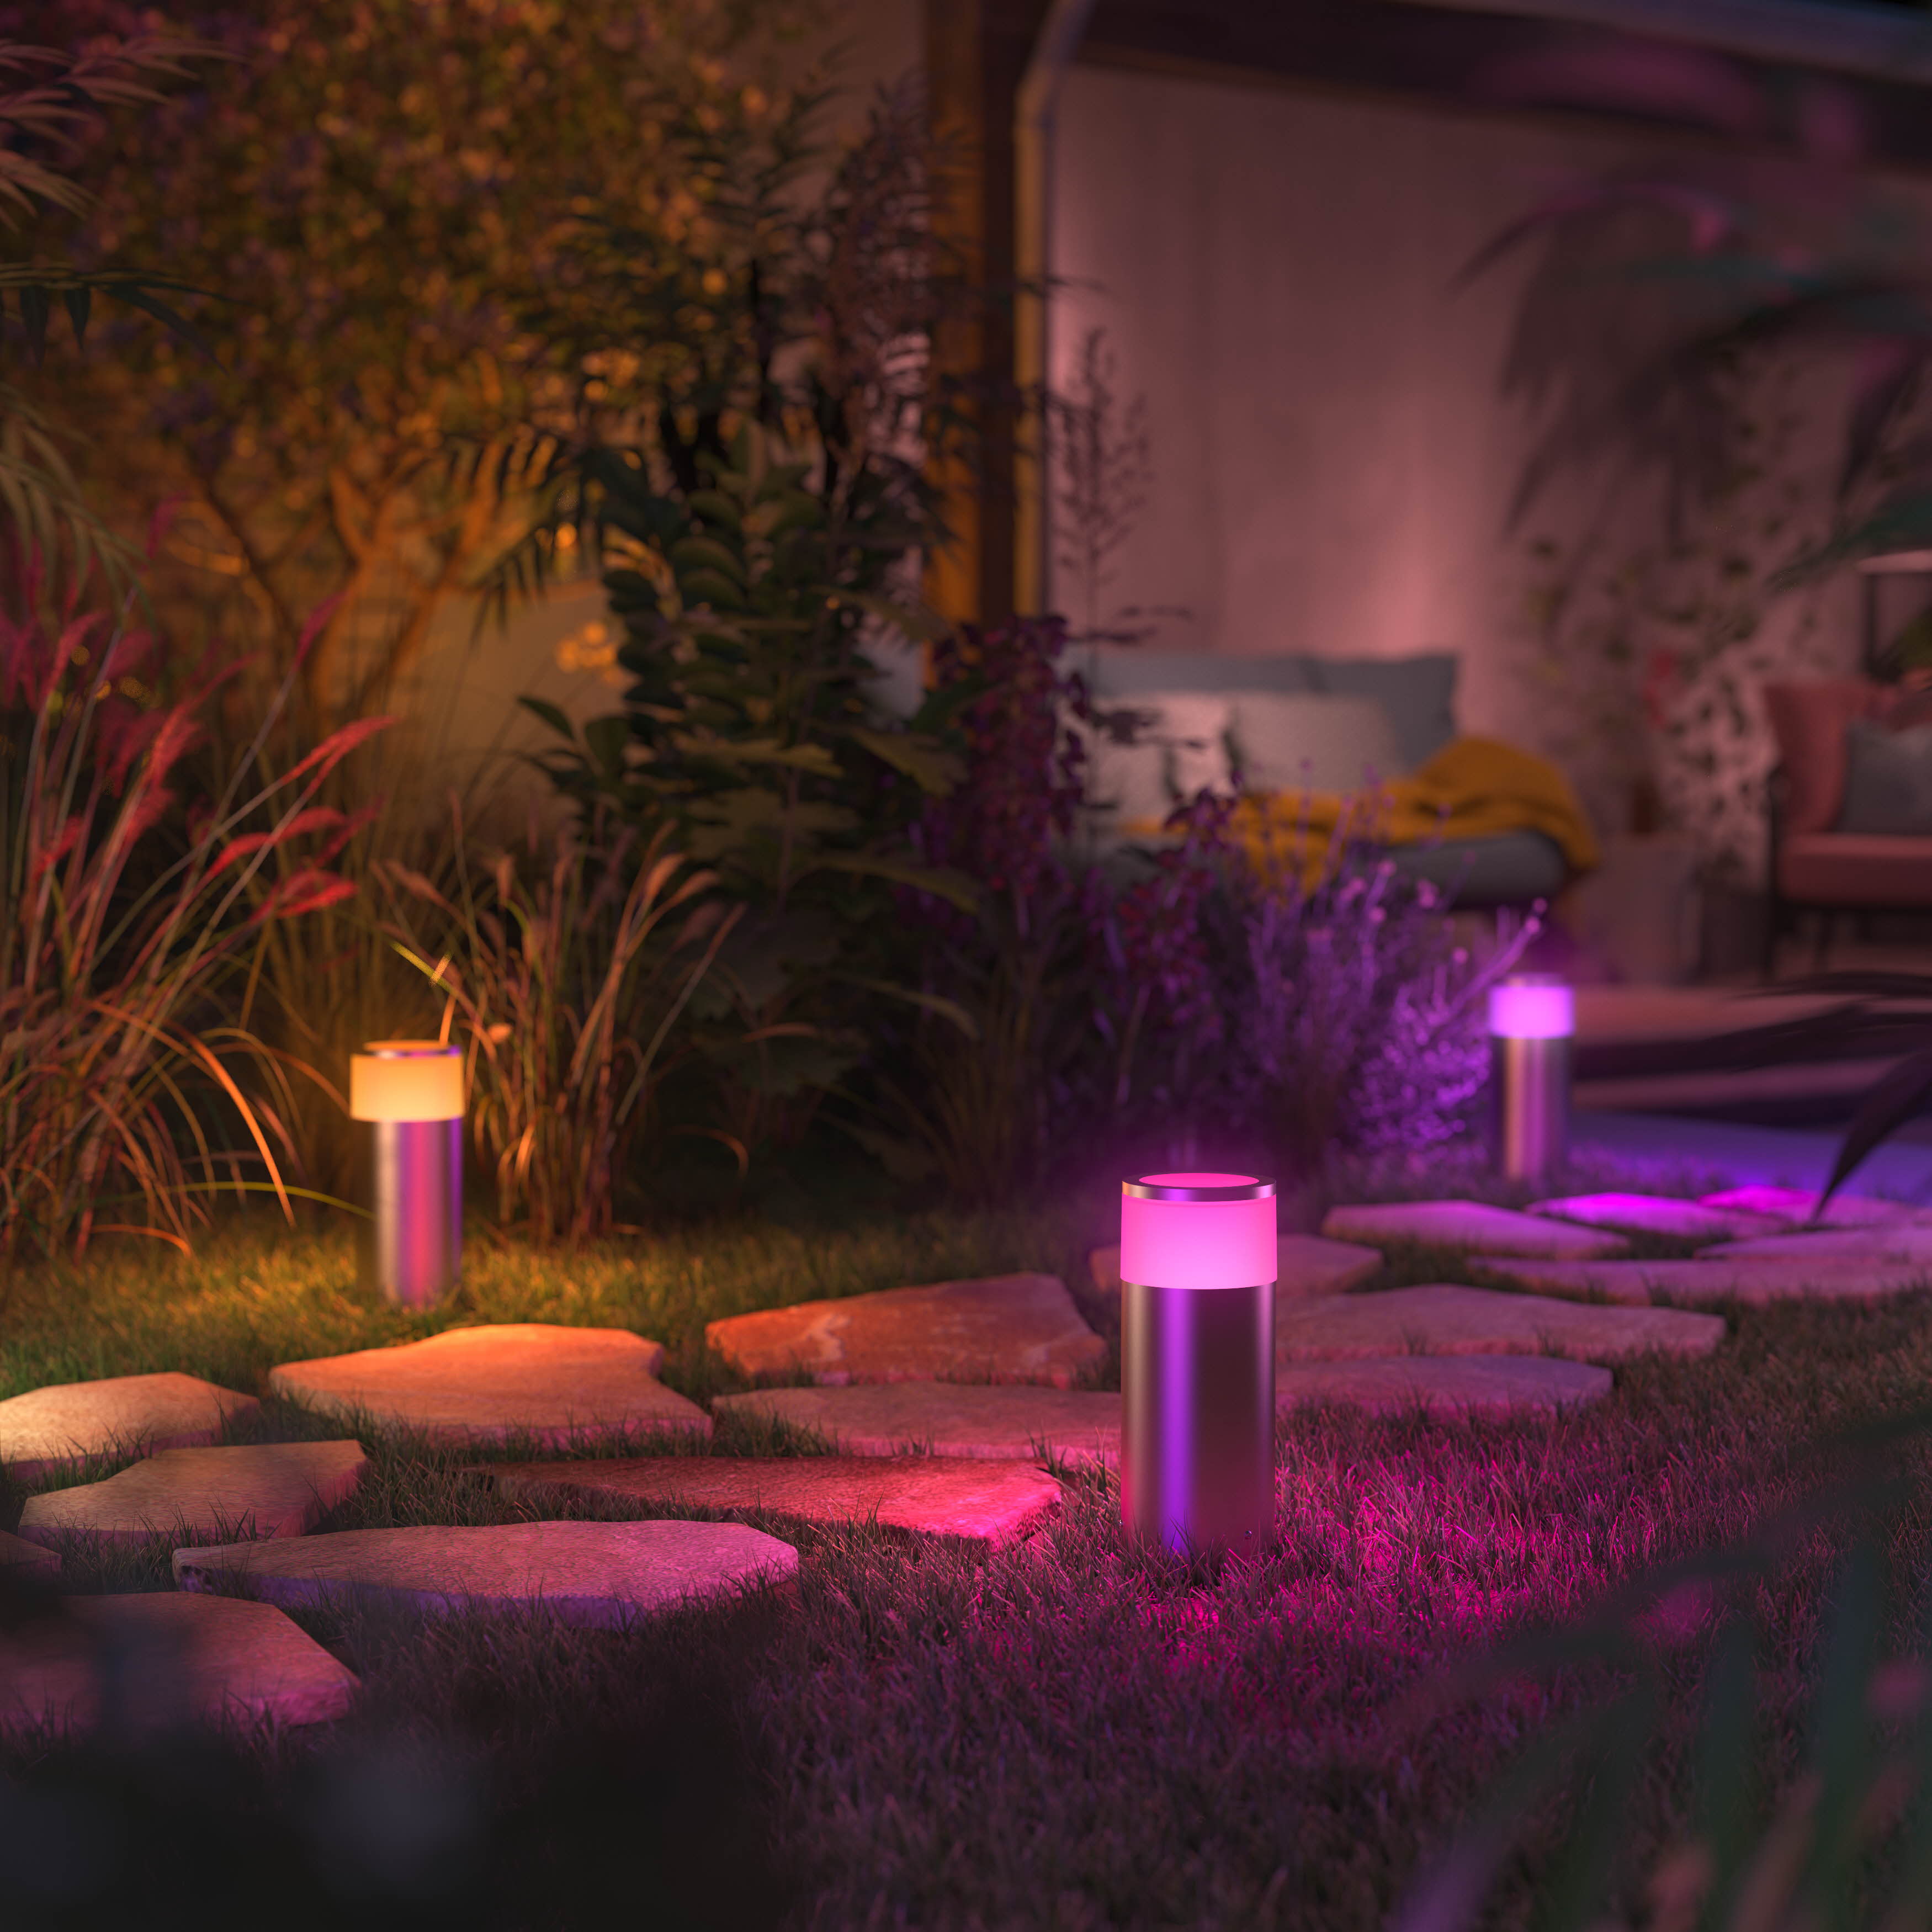 New Philips Hue Smart lights are here to beautify your home and